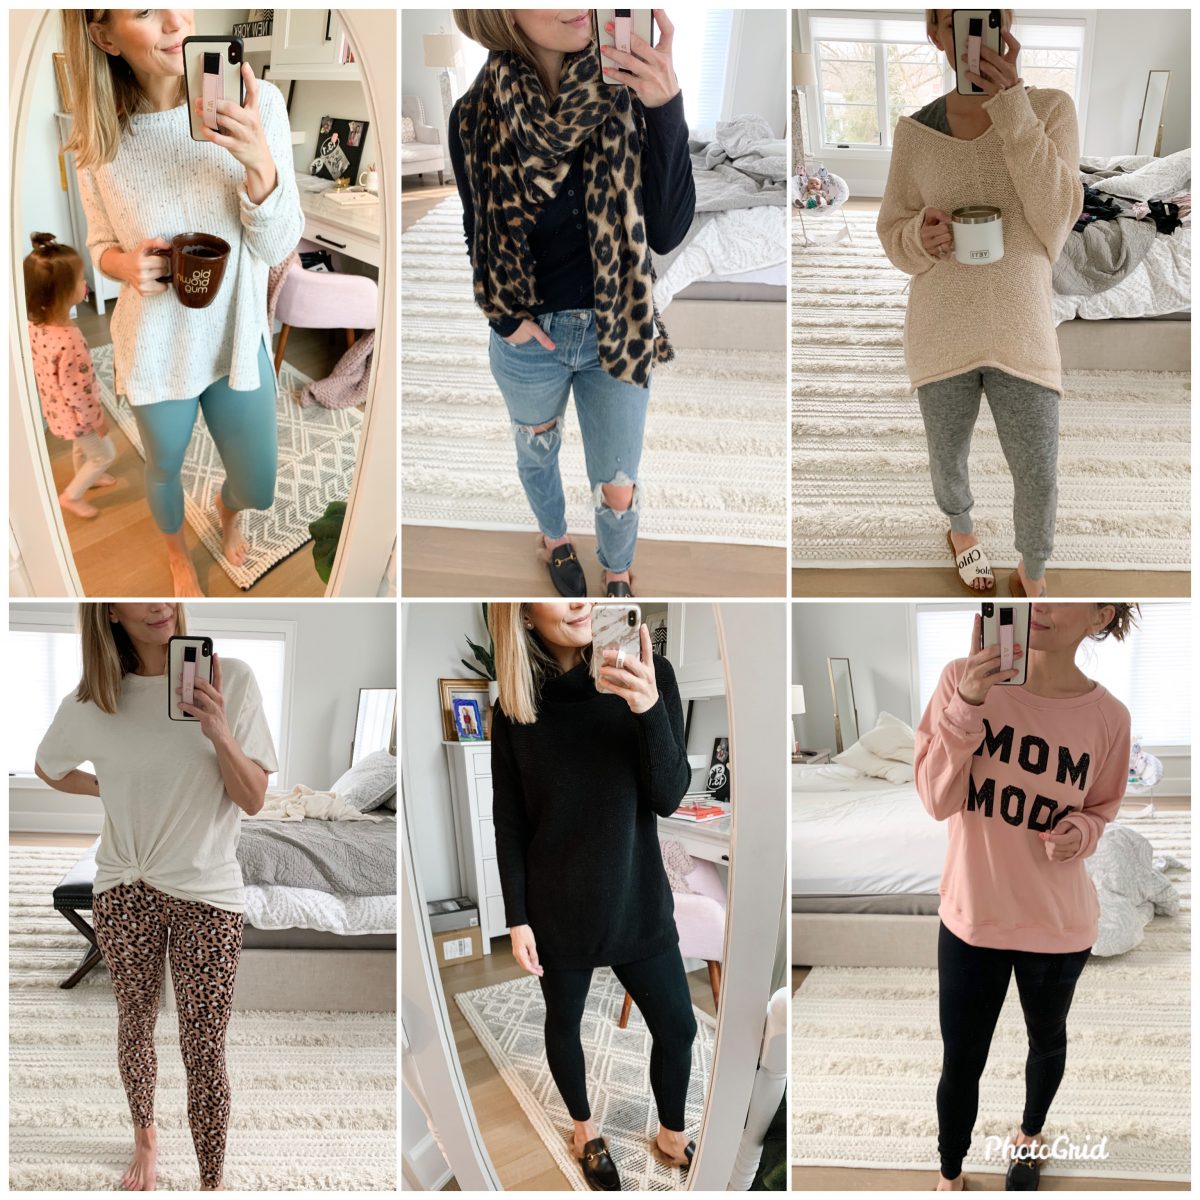 10 Outfit Ideas For When You Don't Want To Get Dressed (Postpartum